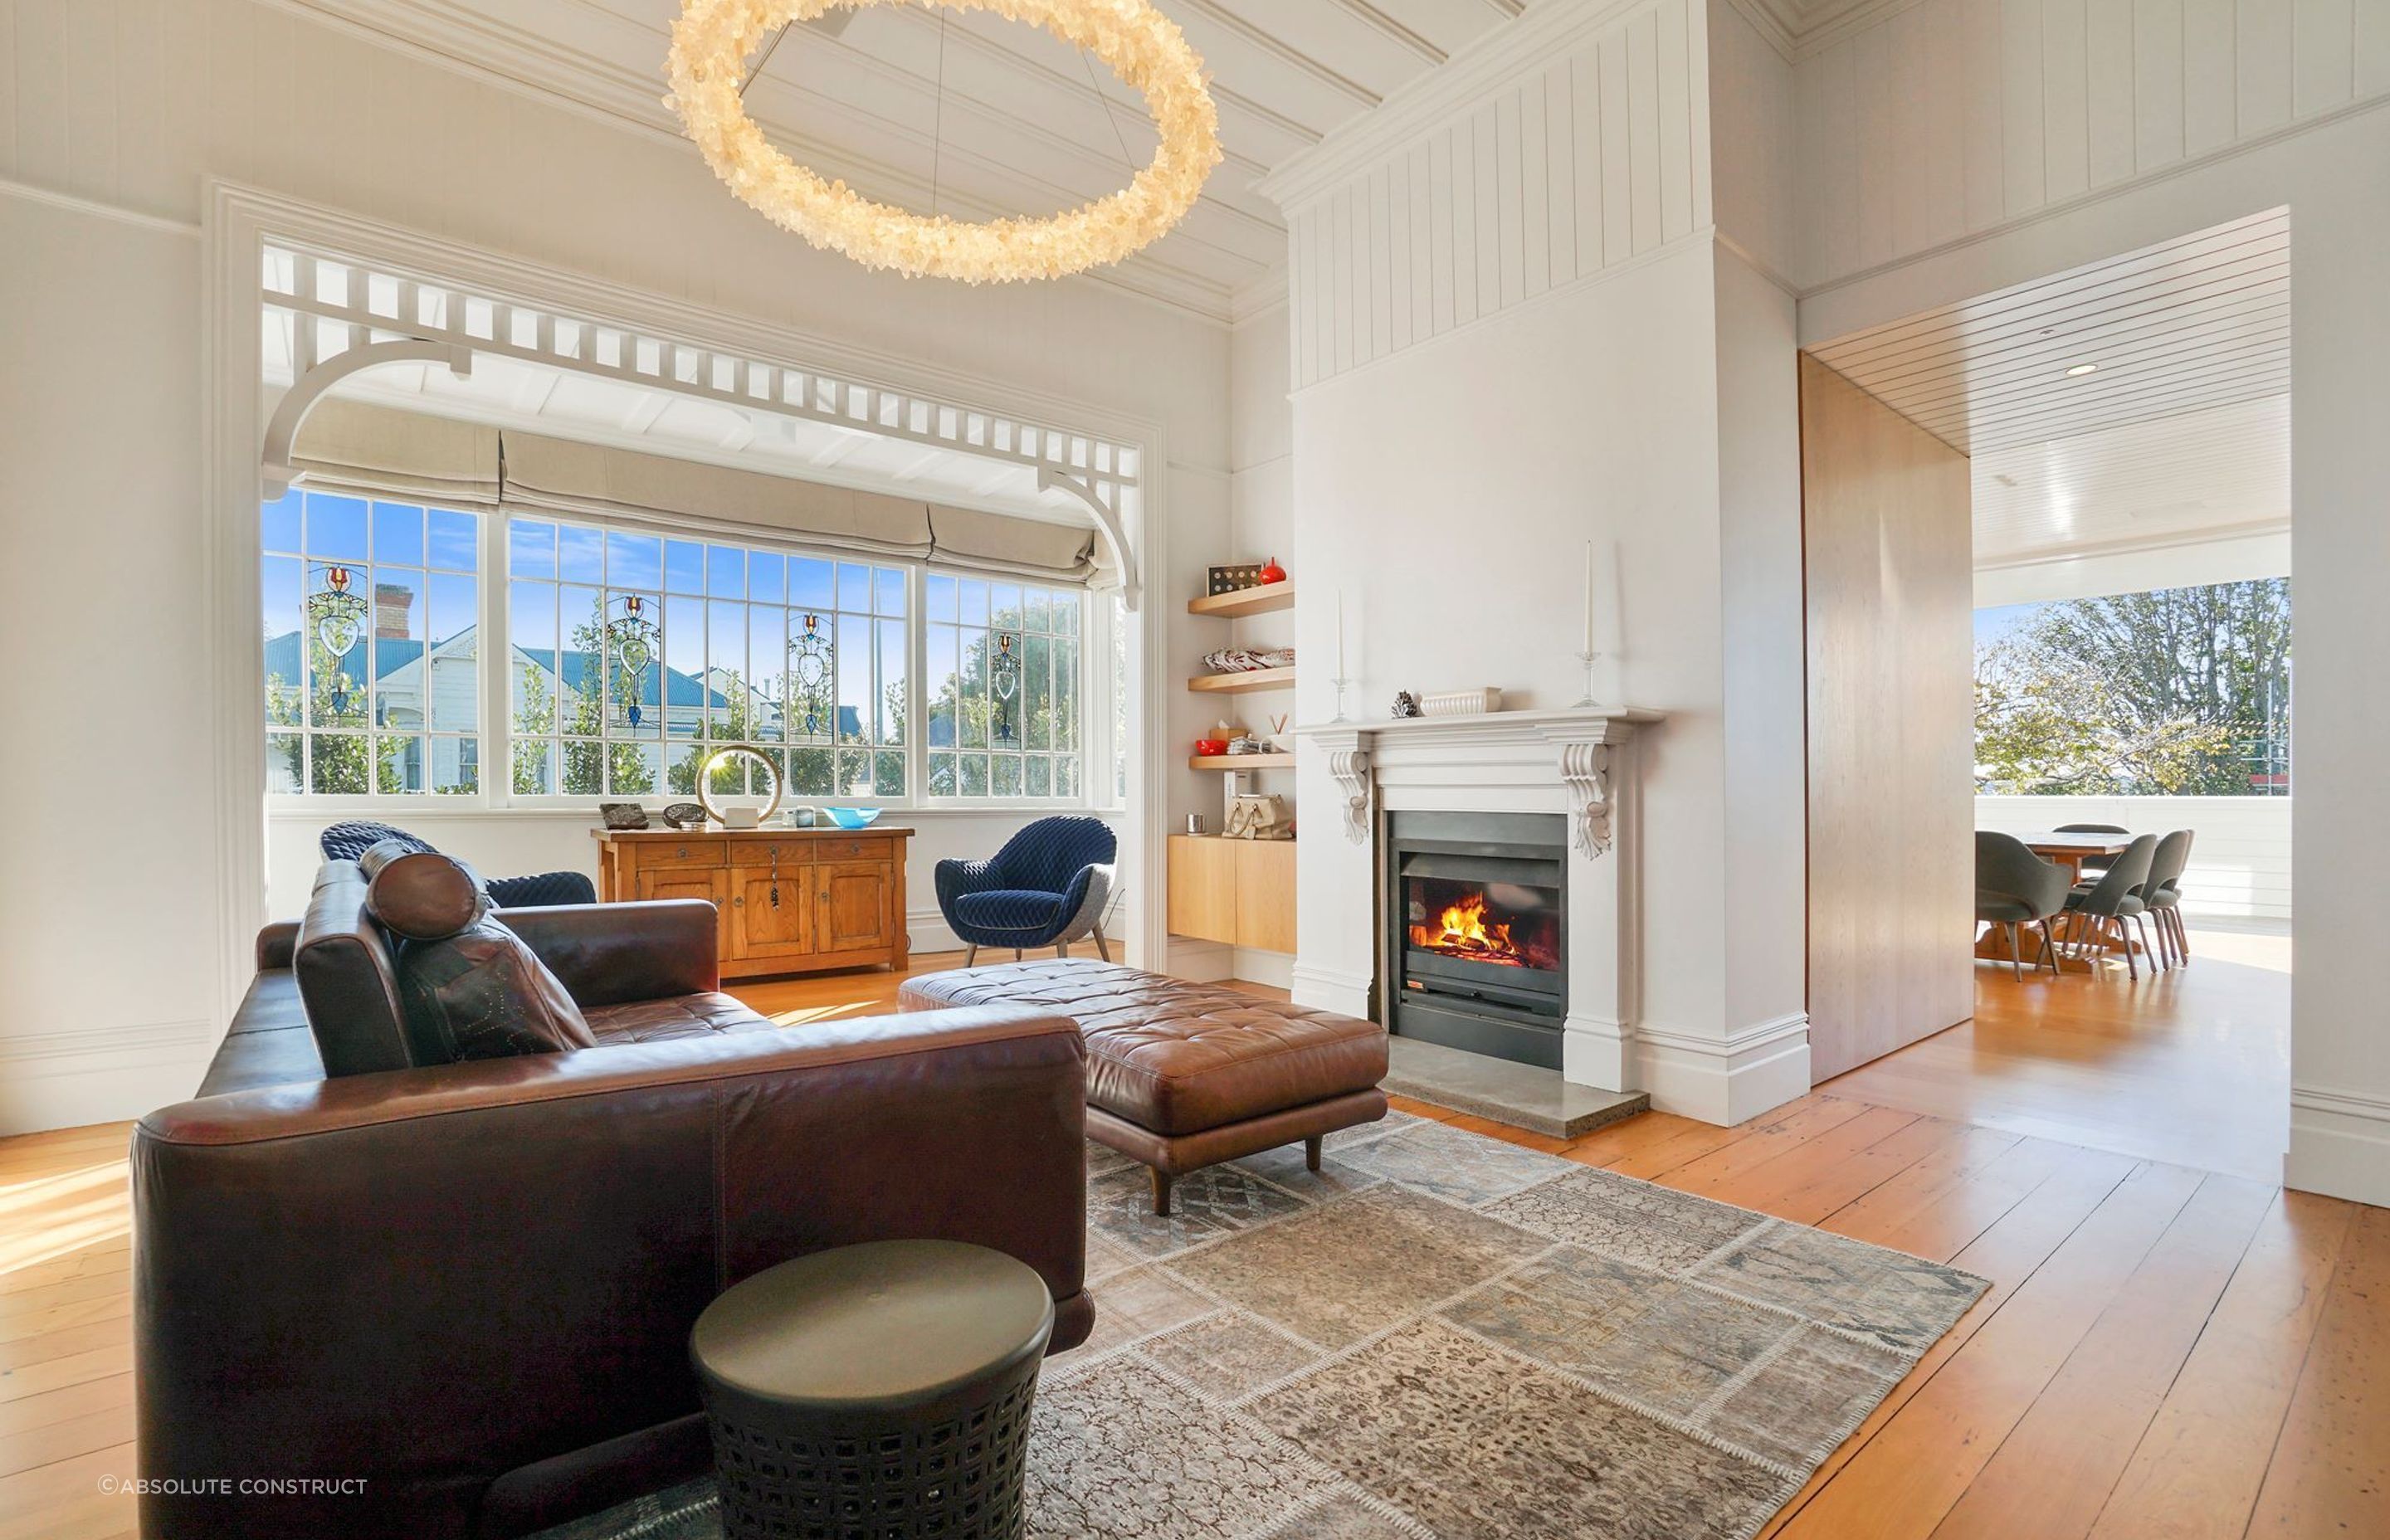 A living room that exudes warmth, thanks in no small part to the statement fireplace.